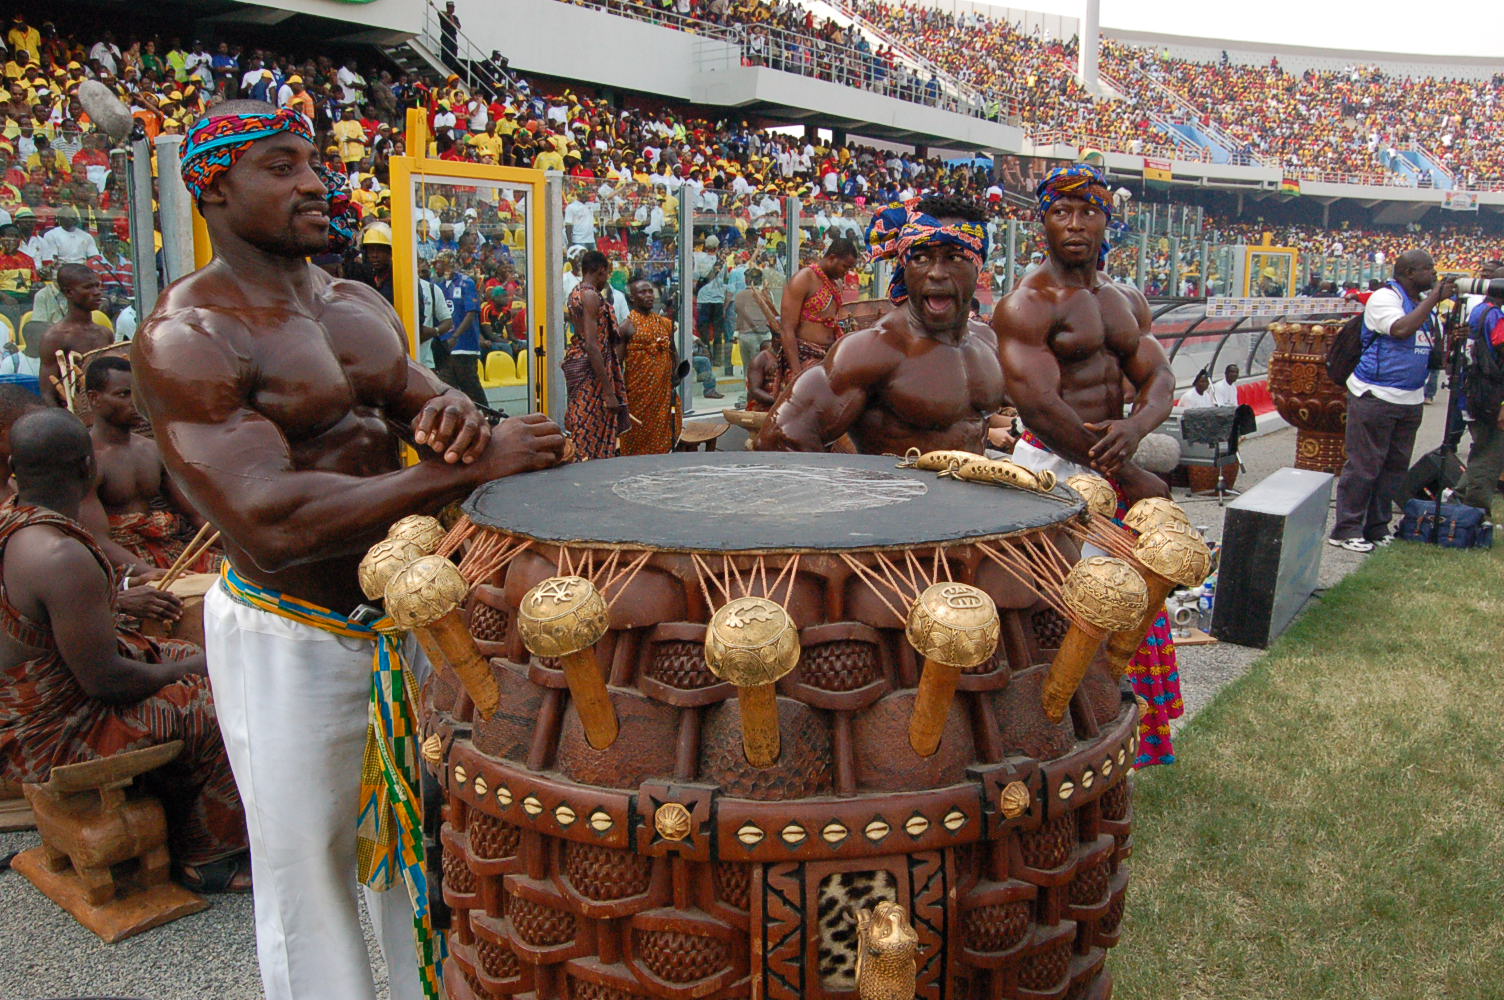 ghana culture and history